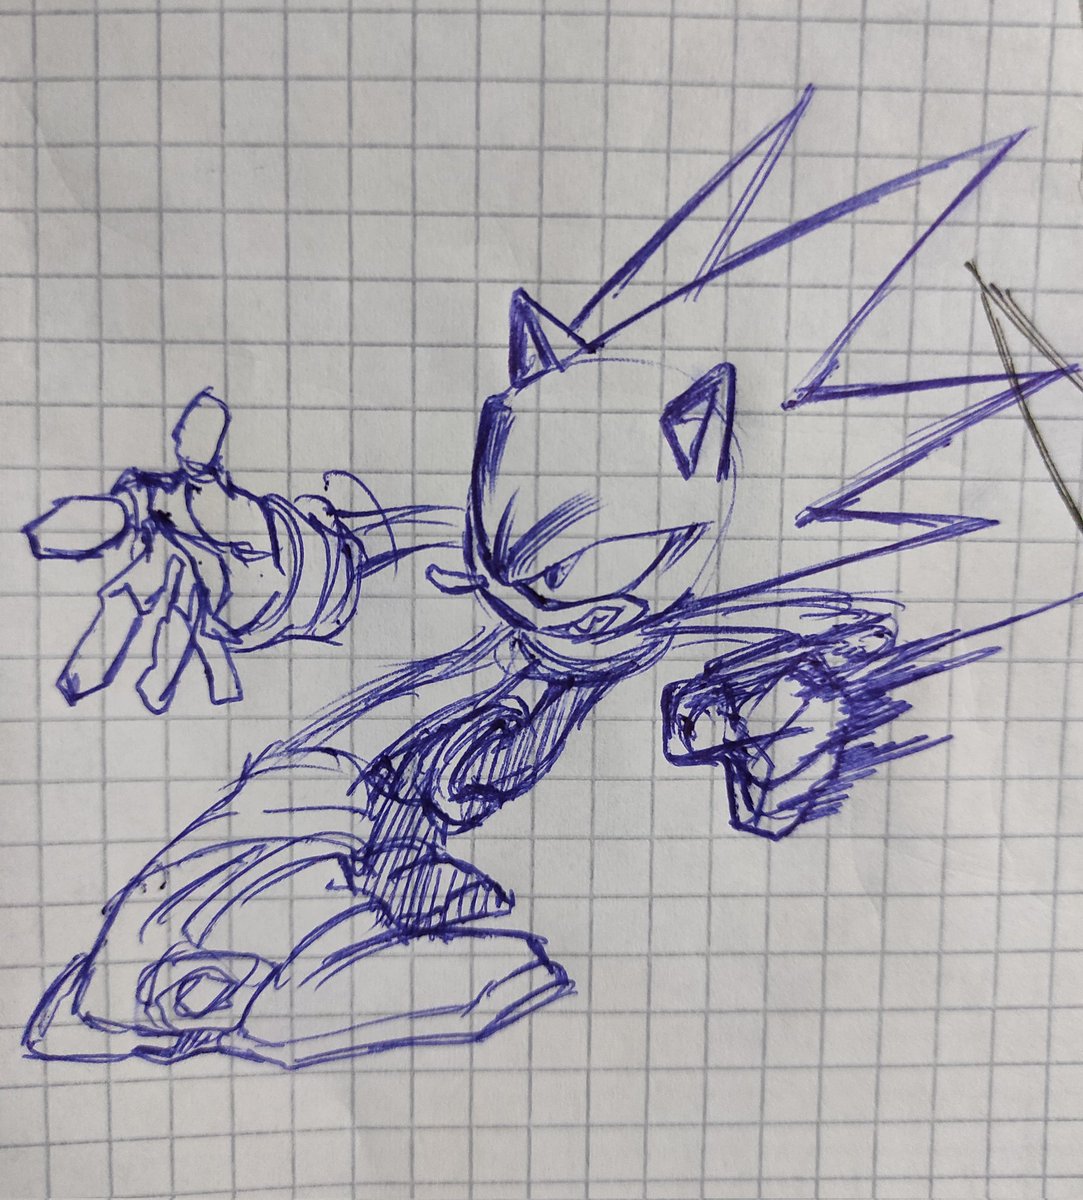 Found this in one of my notebooks
Best sonic I've ever drawn fr